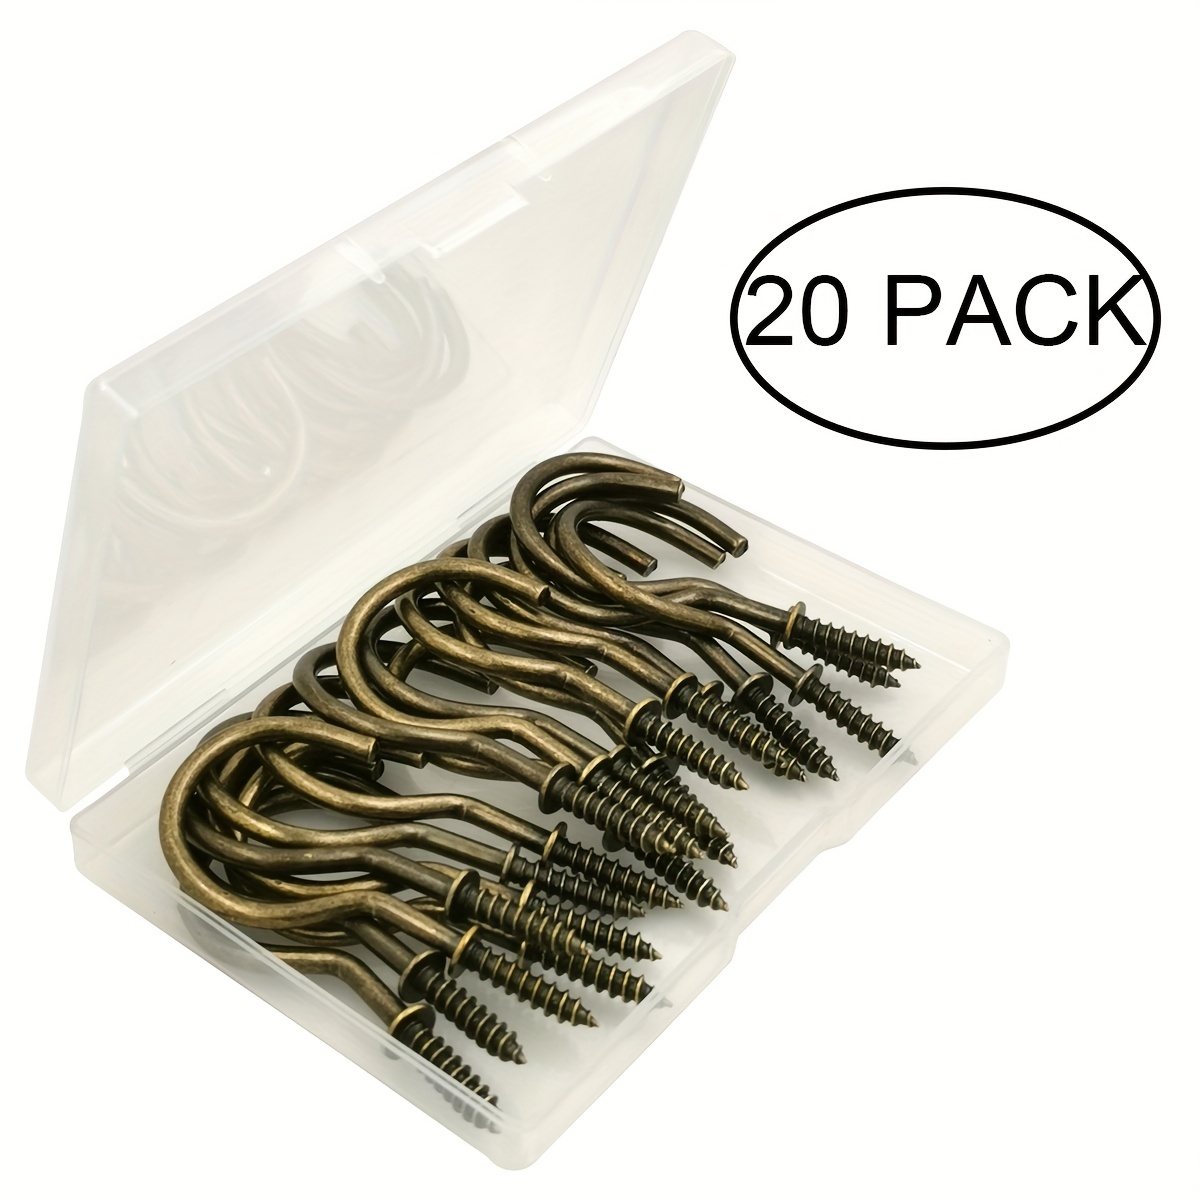 OOK 7/8-inch Brass Cup Hooks - 6pcs